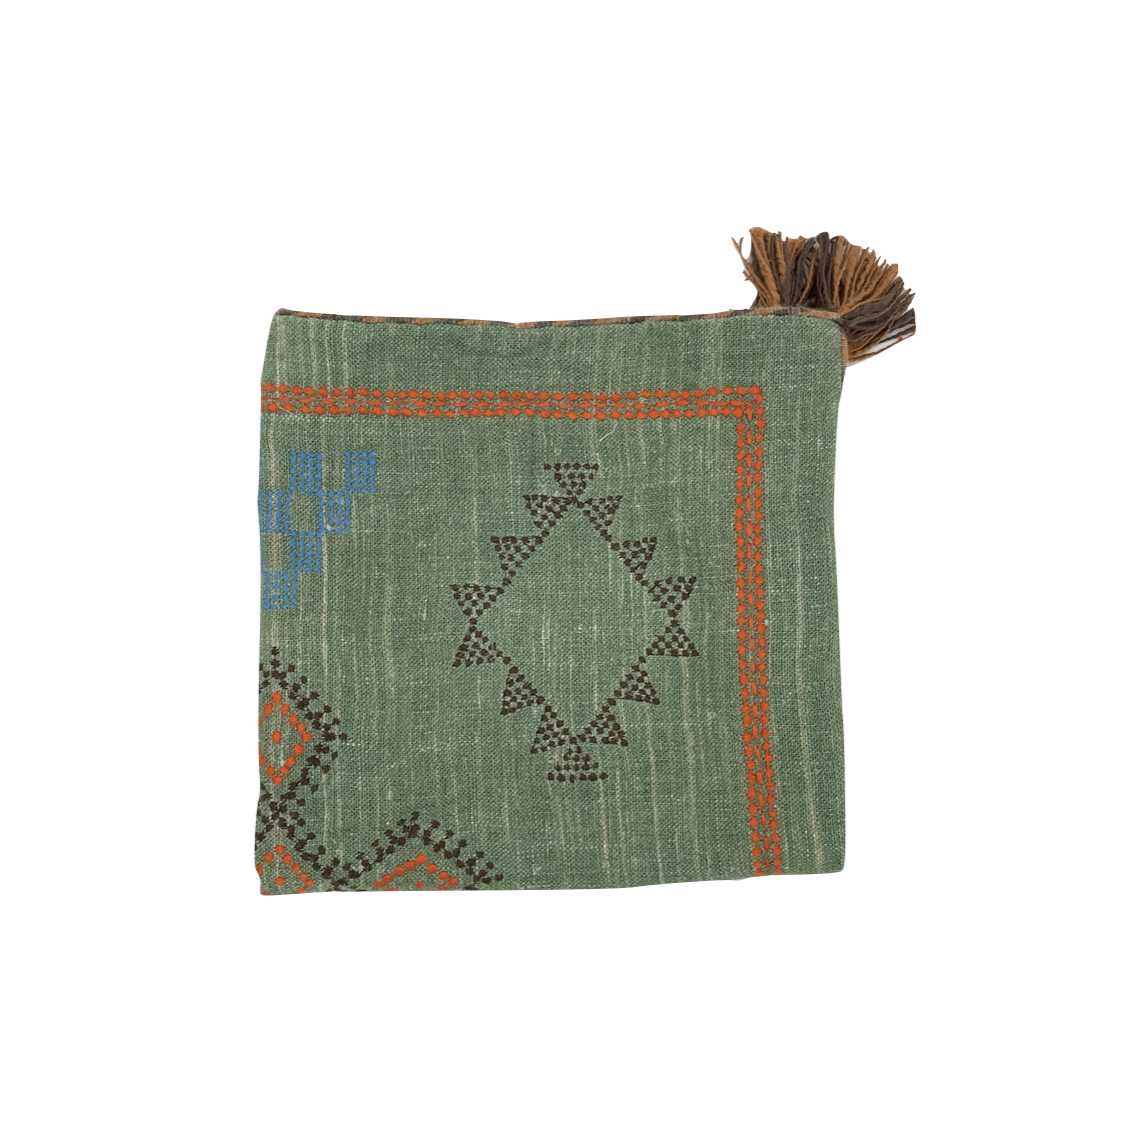 green embroidered cushion cover with tassels, folded in quarters